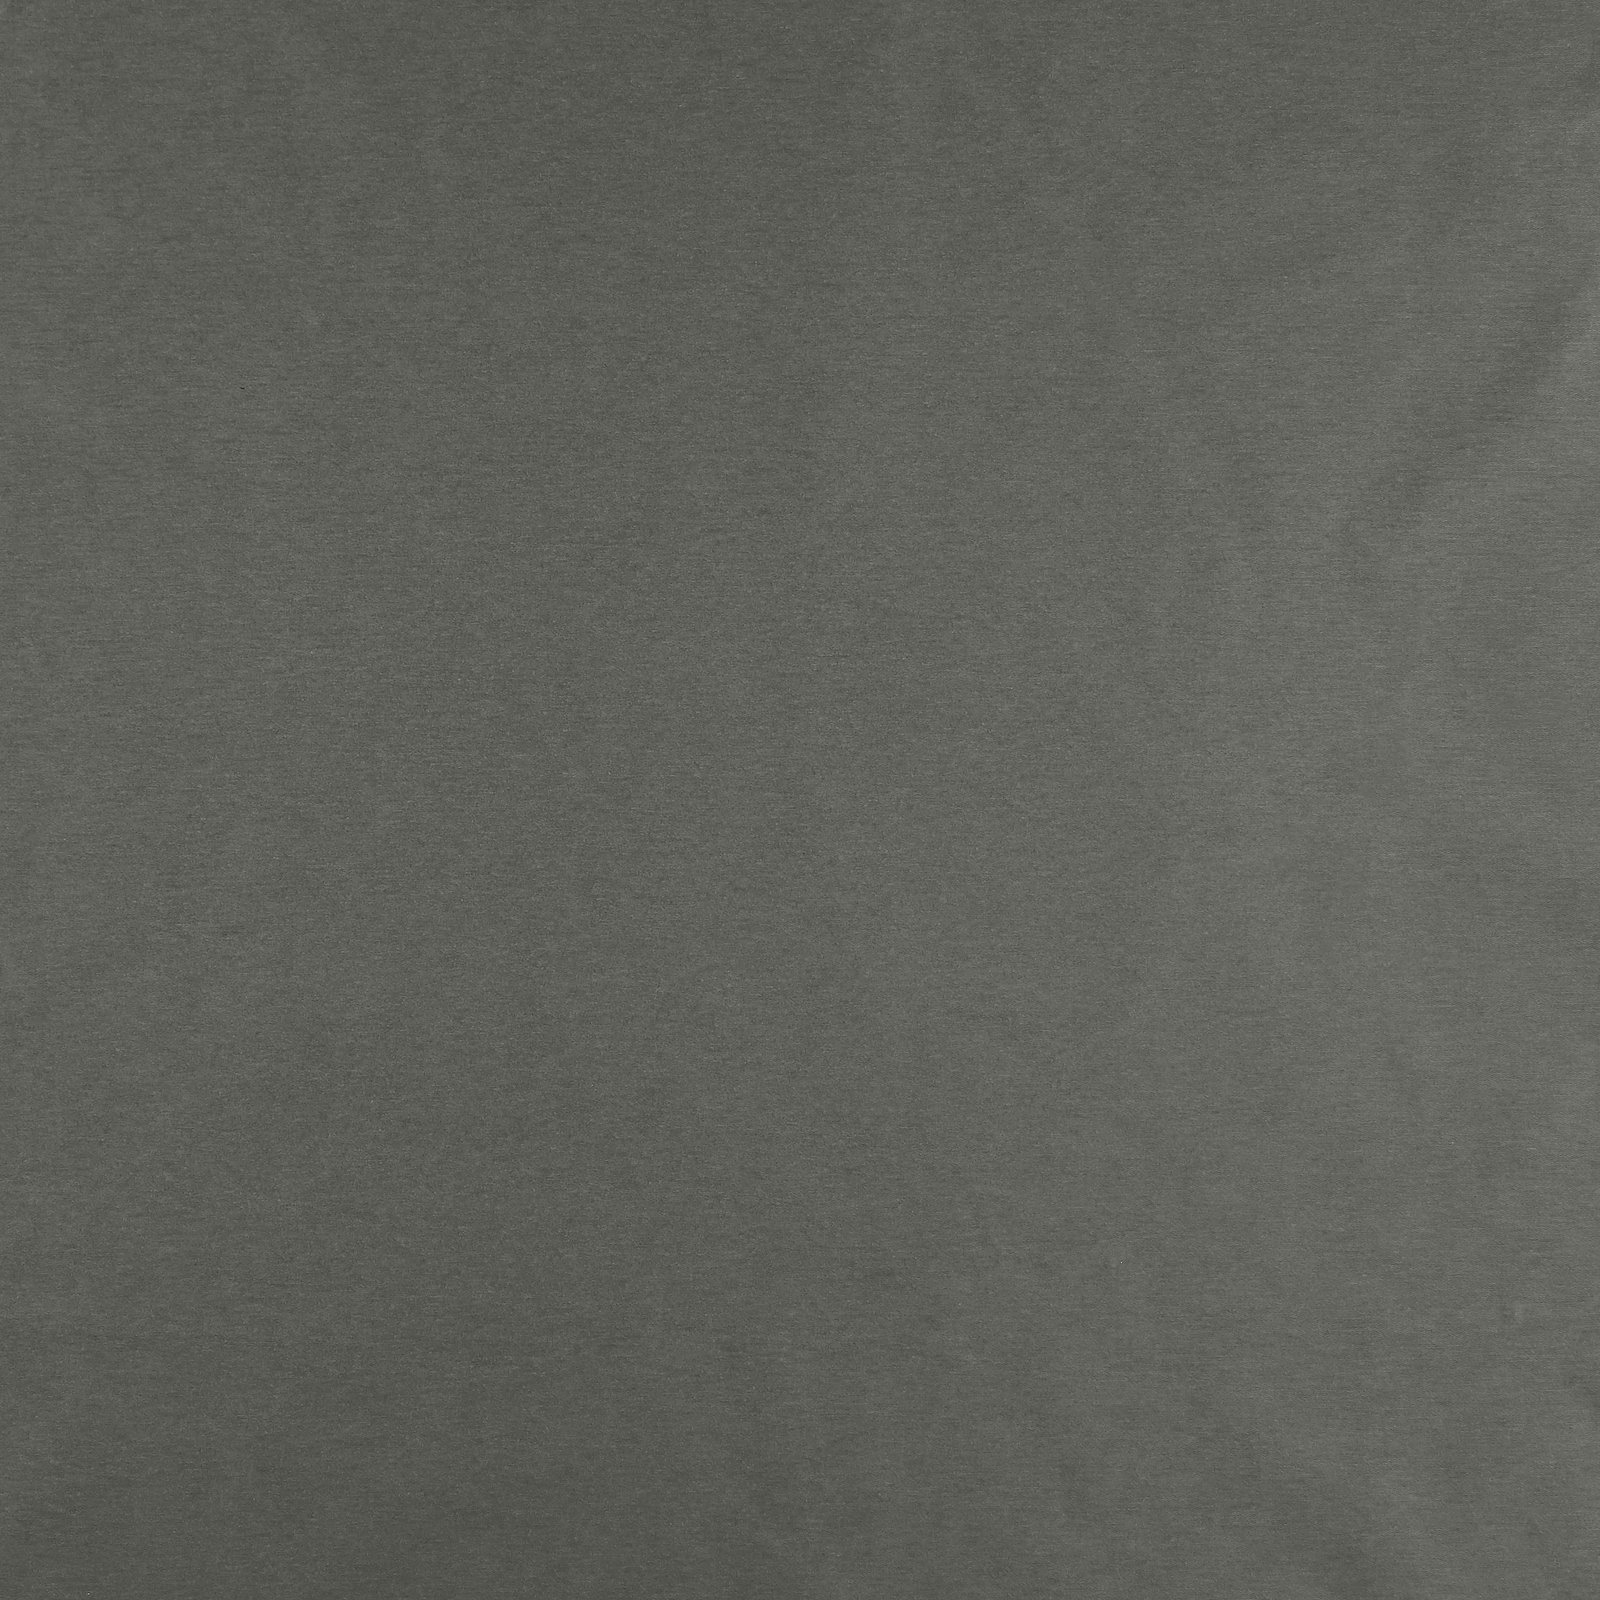 Woven oilcloth dark grey 158-160cm 870253_pack_solid